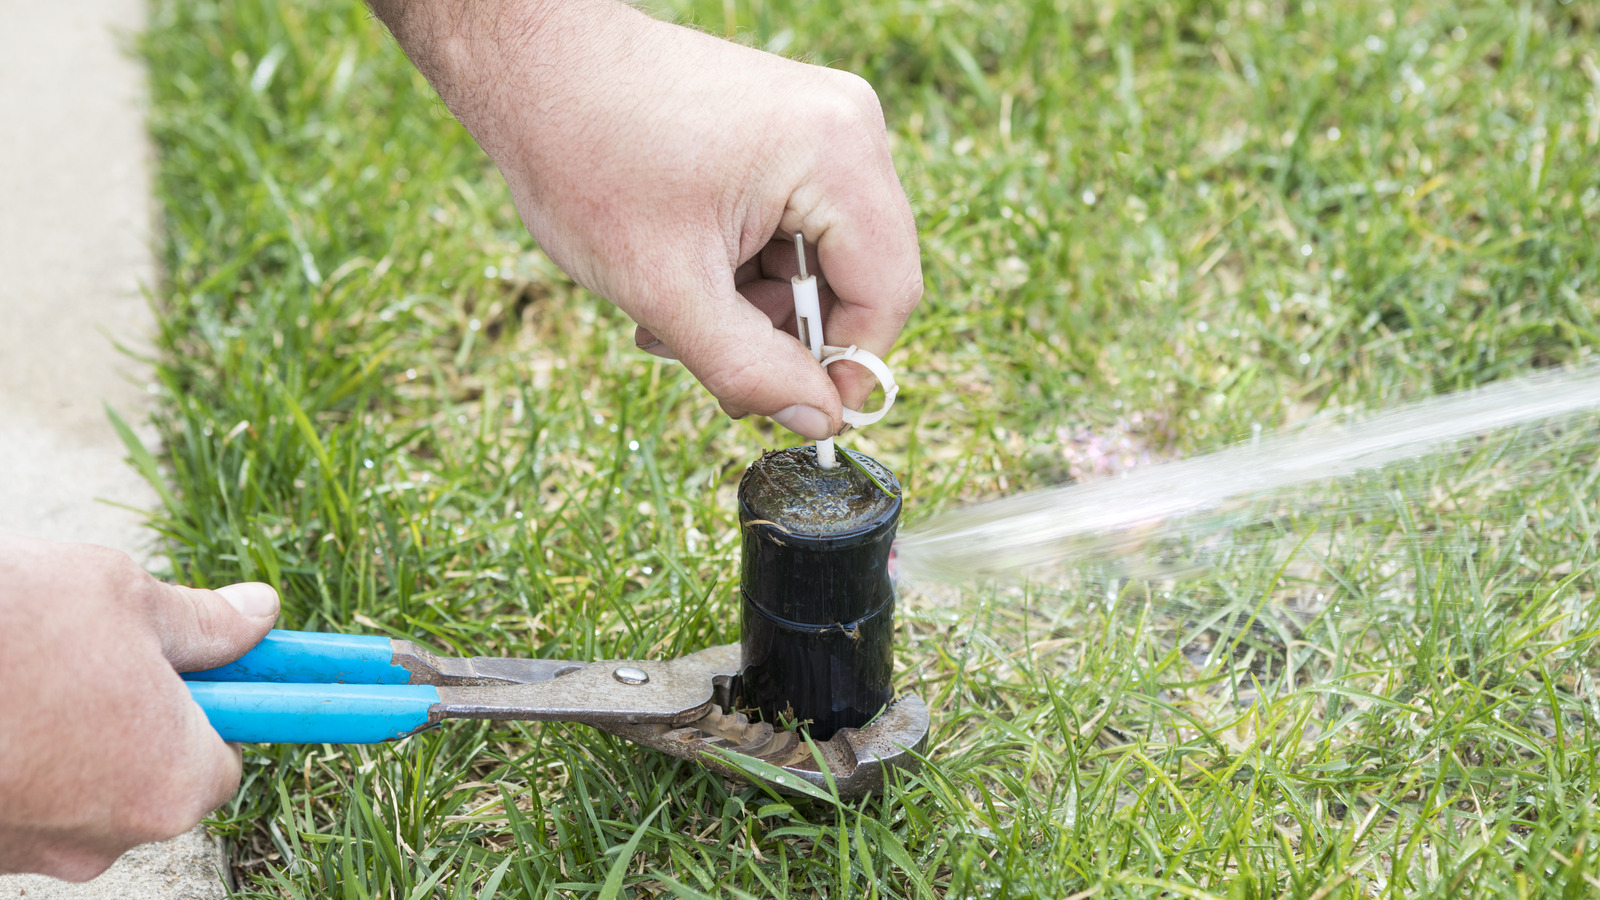 How Often Should You Be Cleaning Your Lawn Sprinkler Heads?